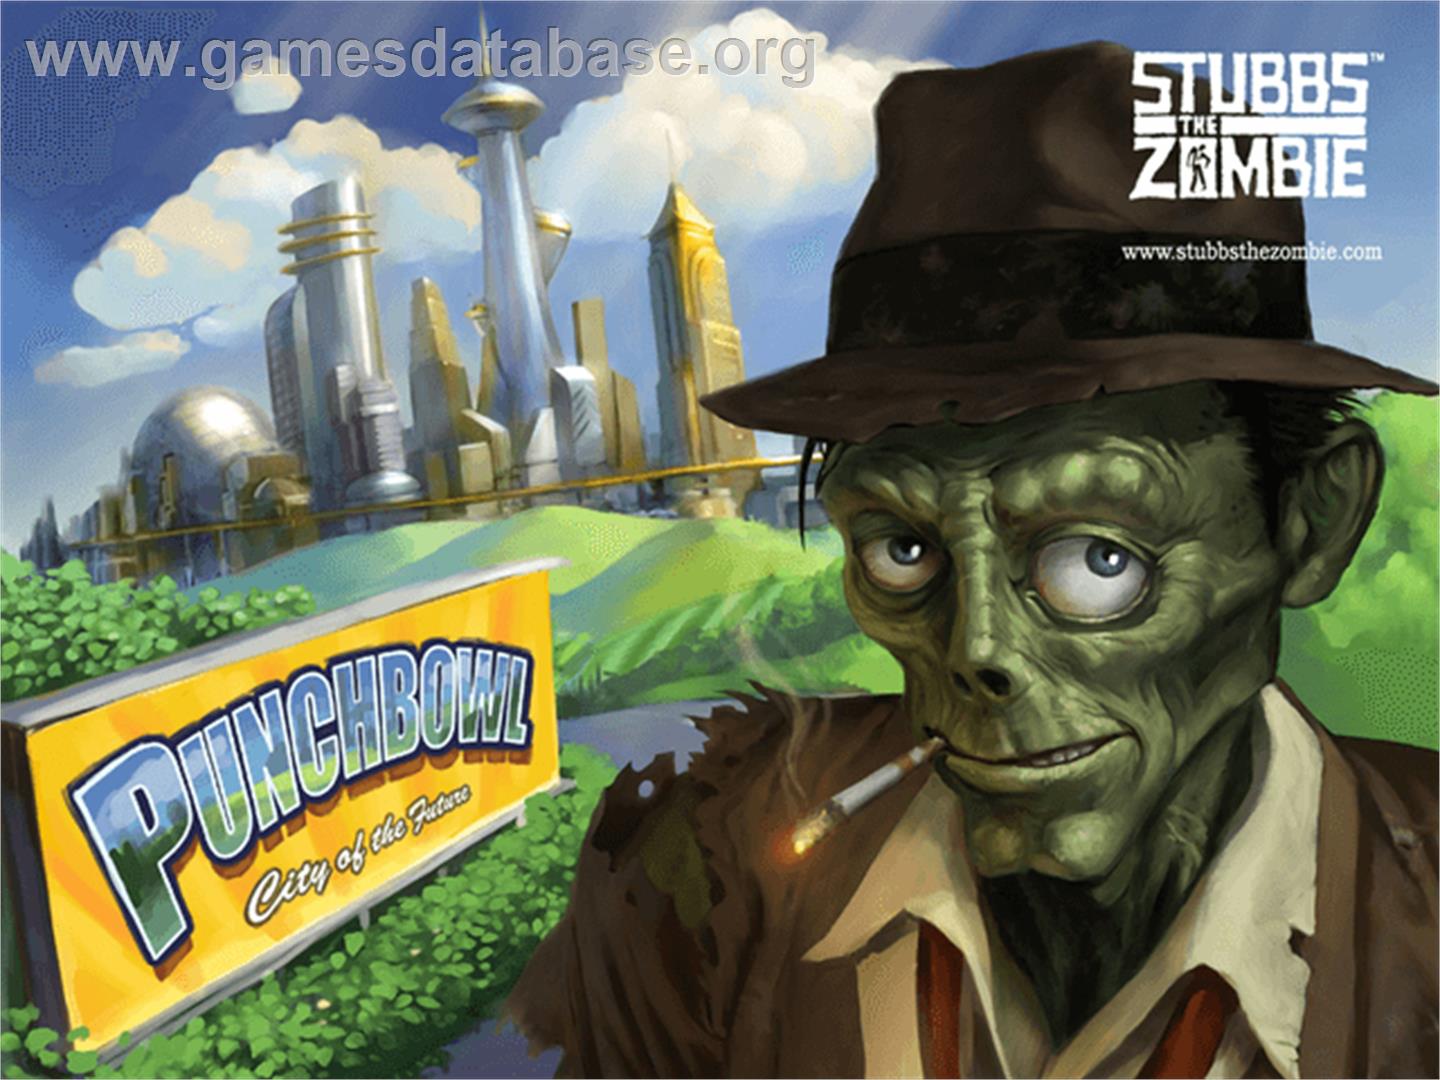 Stubbs the Zombie in Rebel Without a Pulse - Microsoft Xbox - Artwork - Title Screen